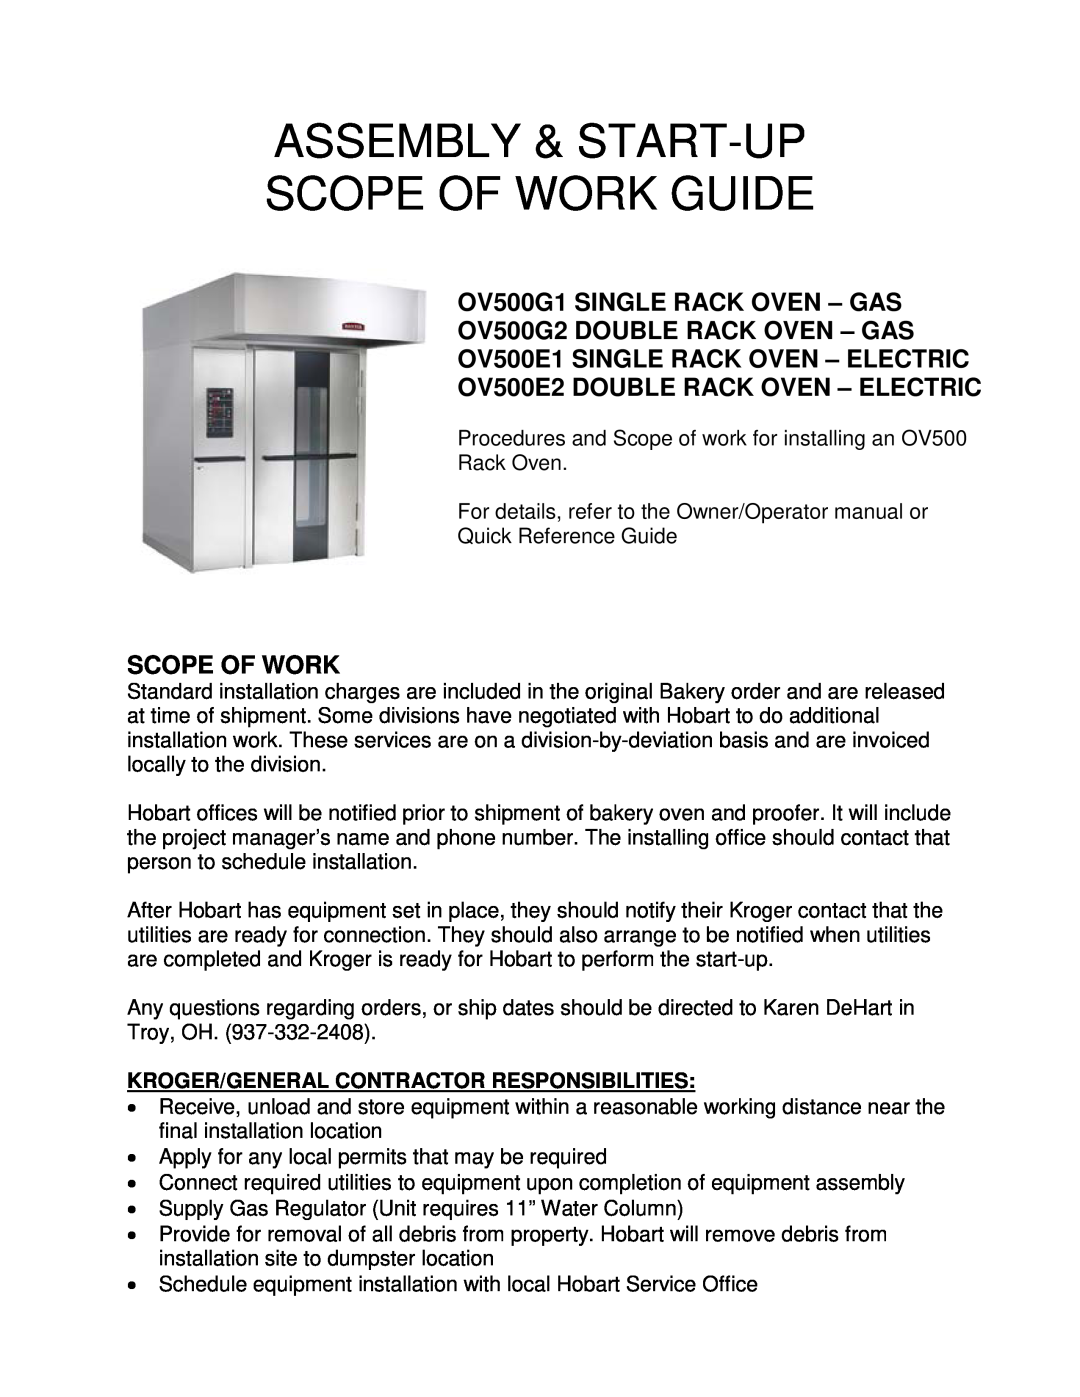 Hobart OV500E2, OV500G2, OV500G1 manual Kroger/General Contractor Responsibilities, Assembly & Start-Up Scope Of Work Guide 